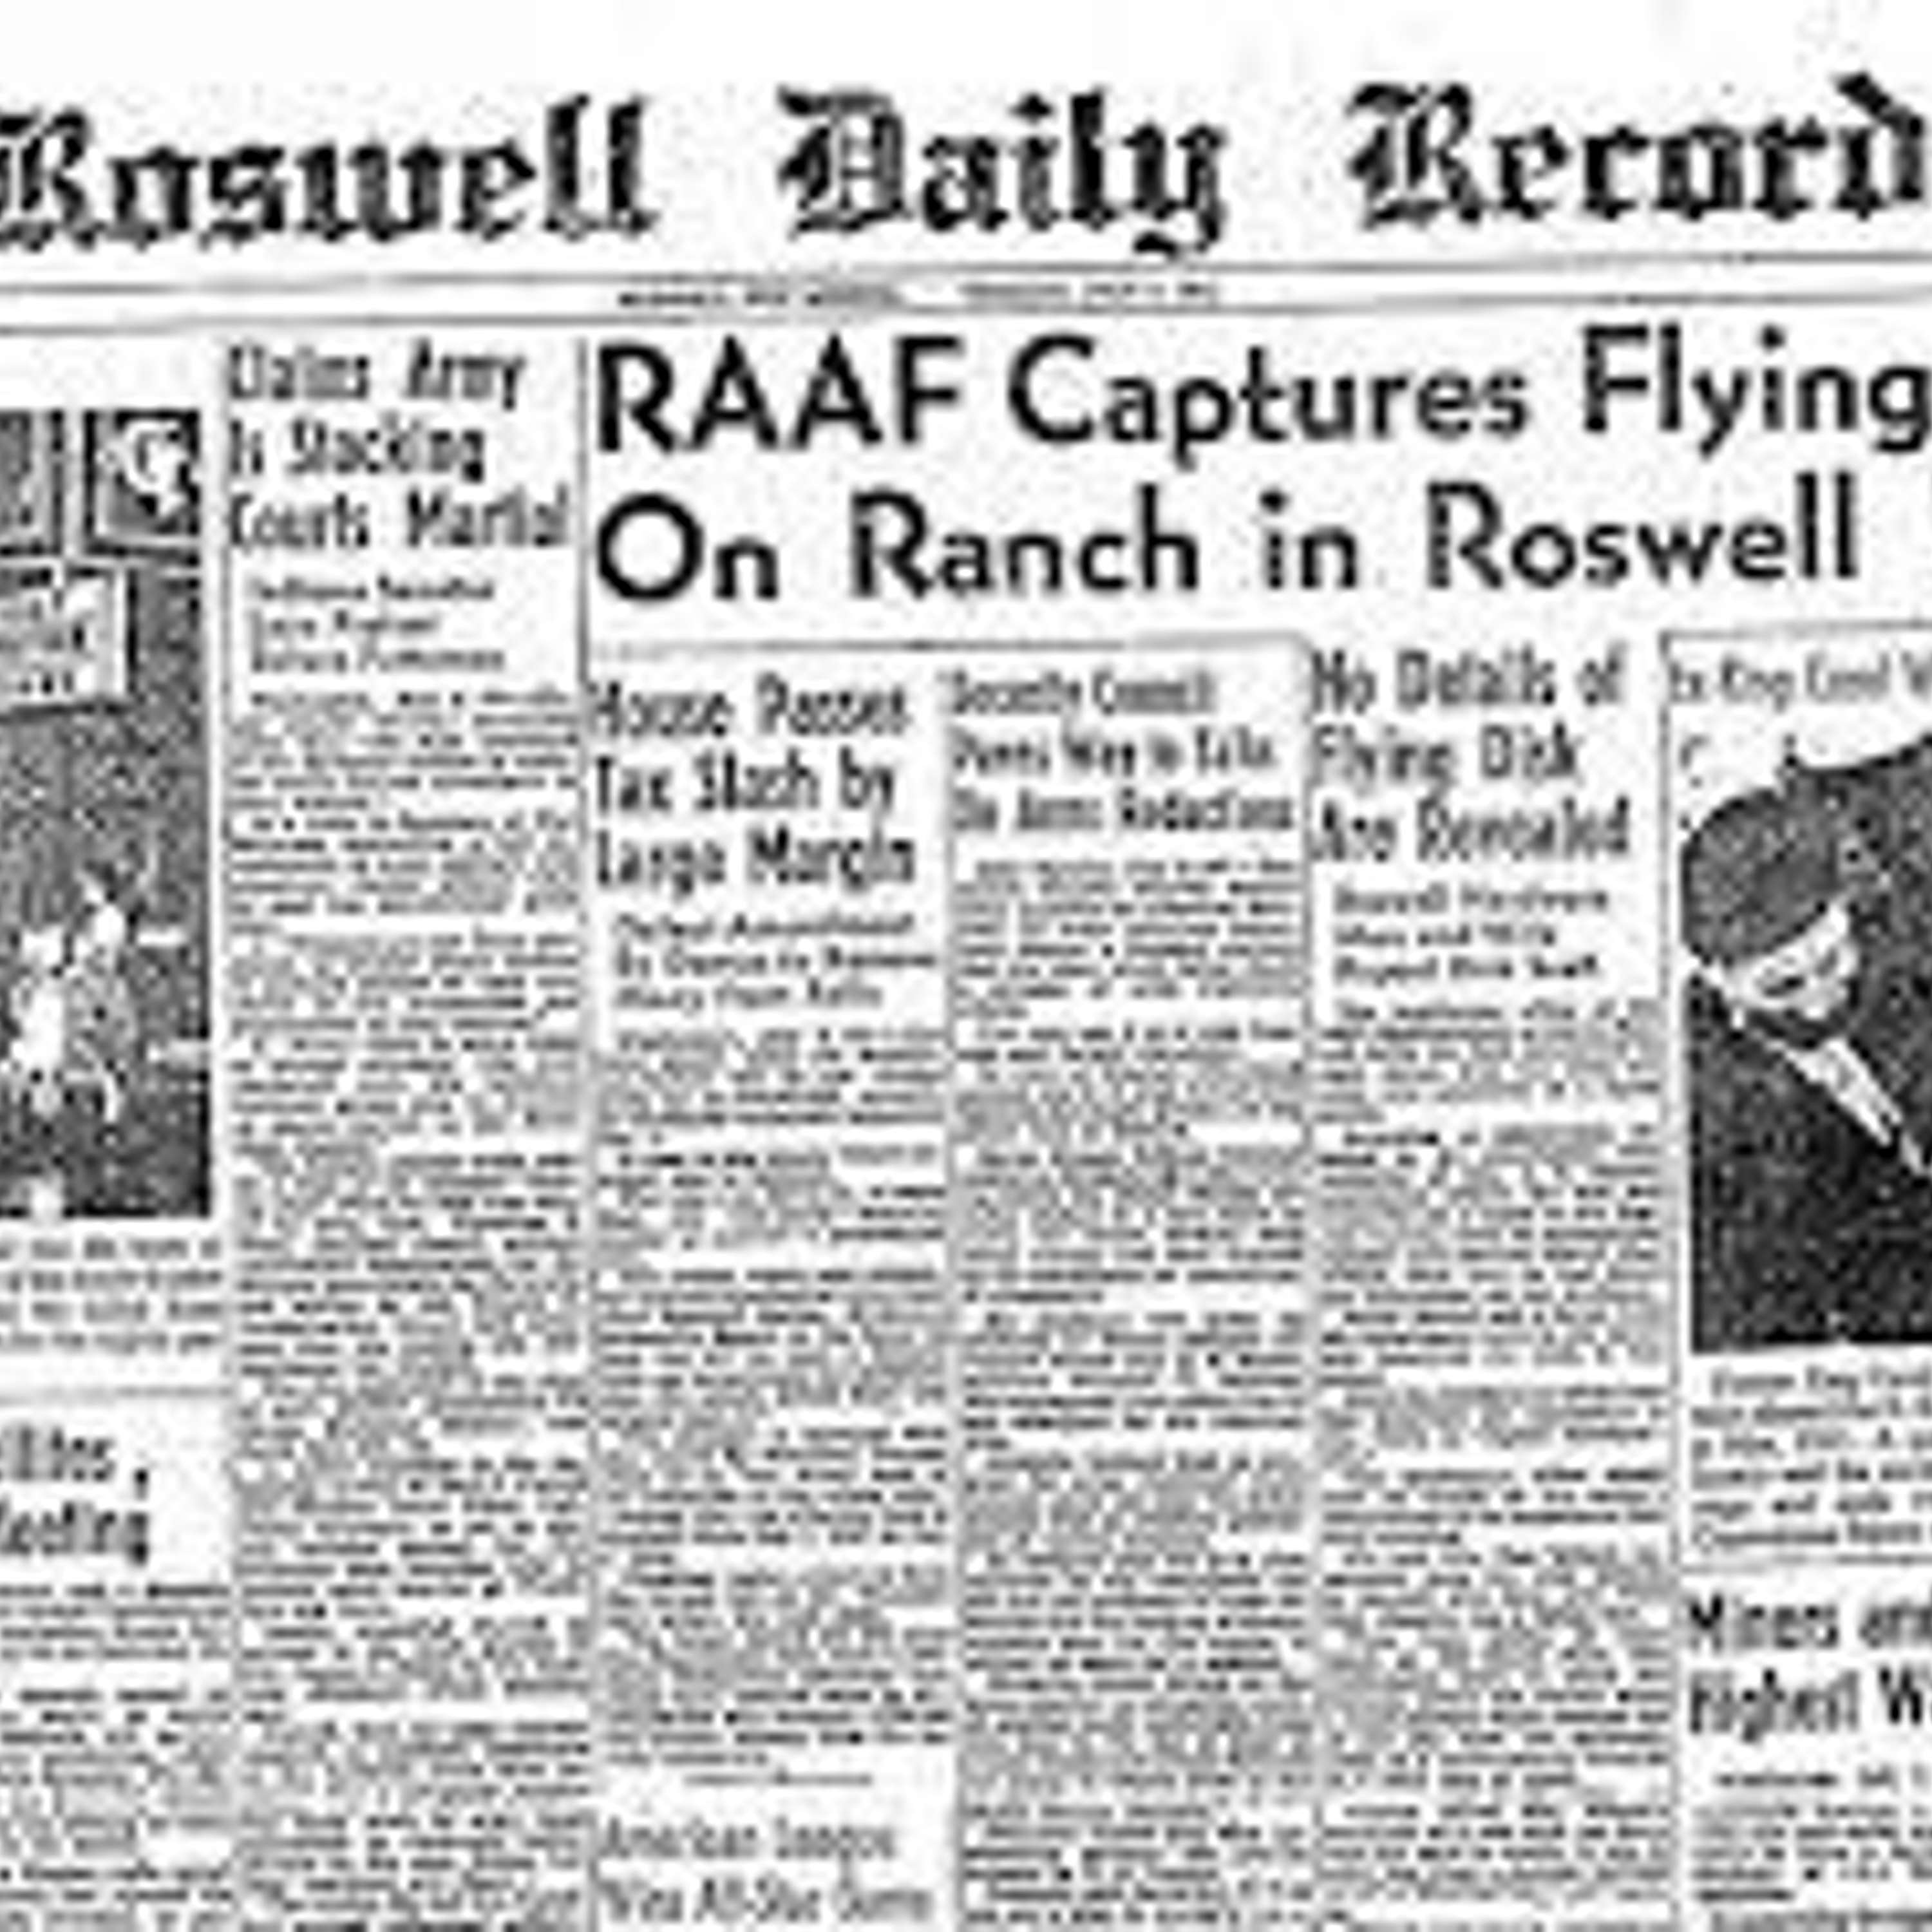 Roswell, Einstein, Hawking, the Pentagon, and more! UFO - UAP News & Hot Takes with Harvard Astrophysicist Avi Loeb